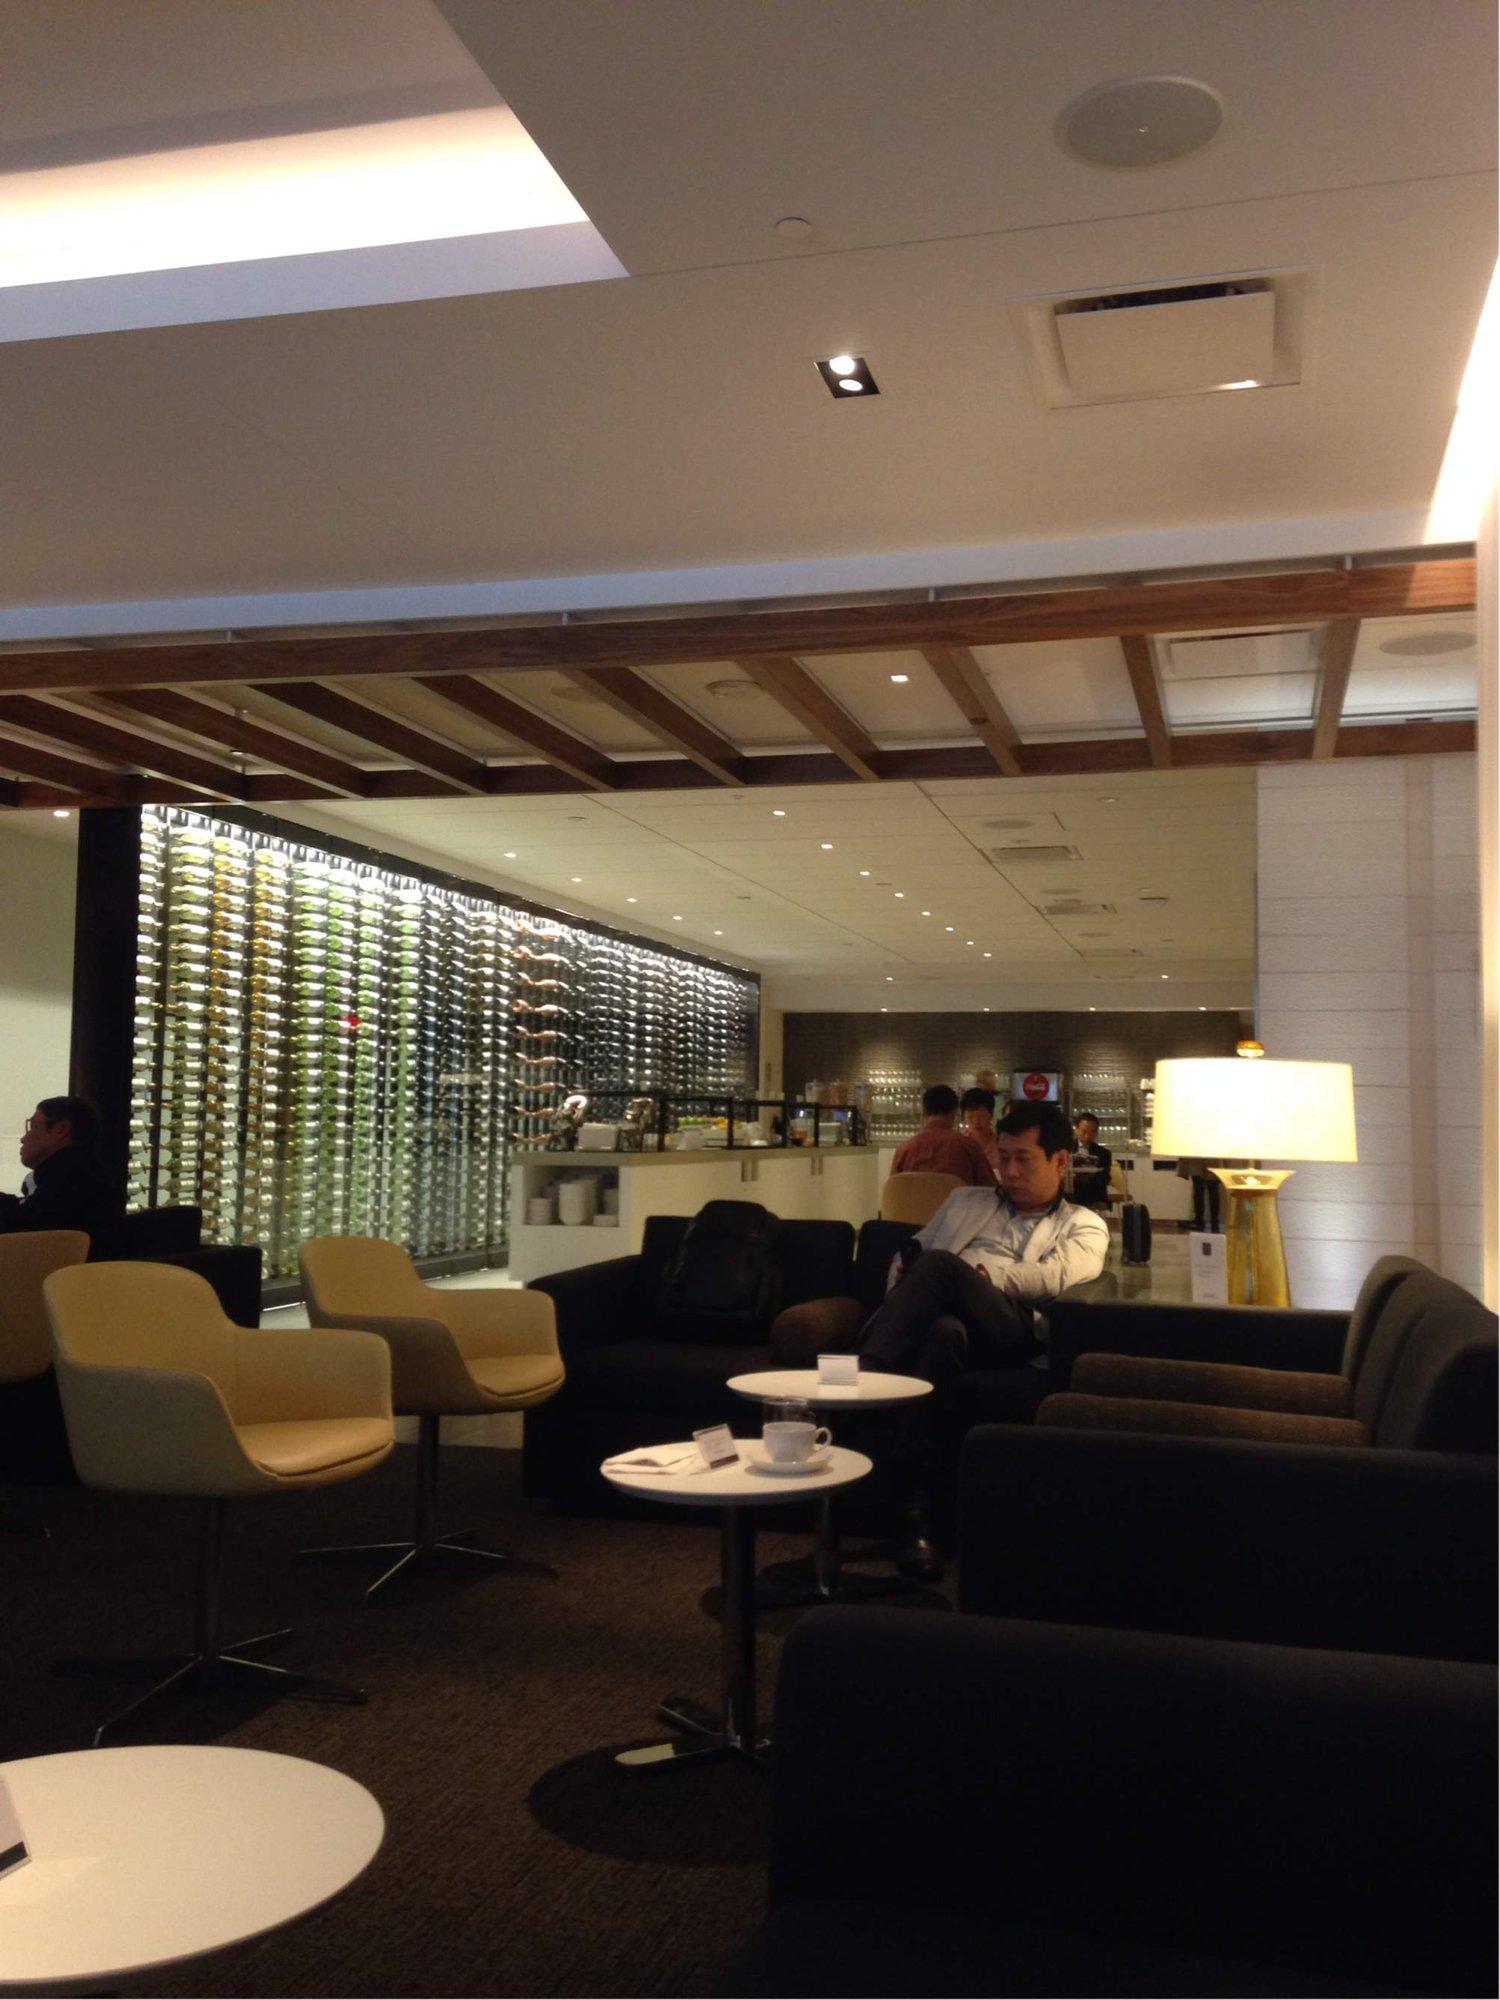 Star Alliance Business Class Lounge image 35 of 72